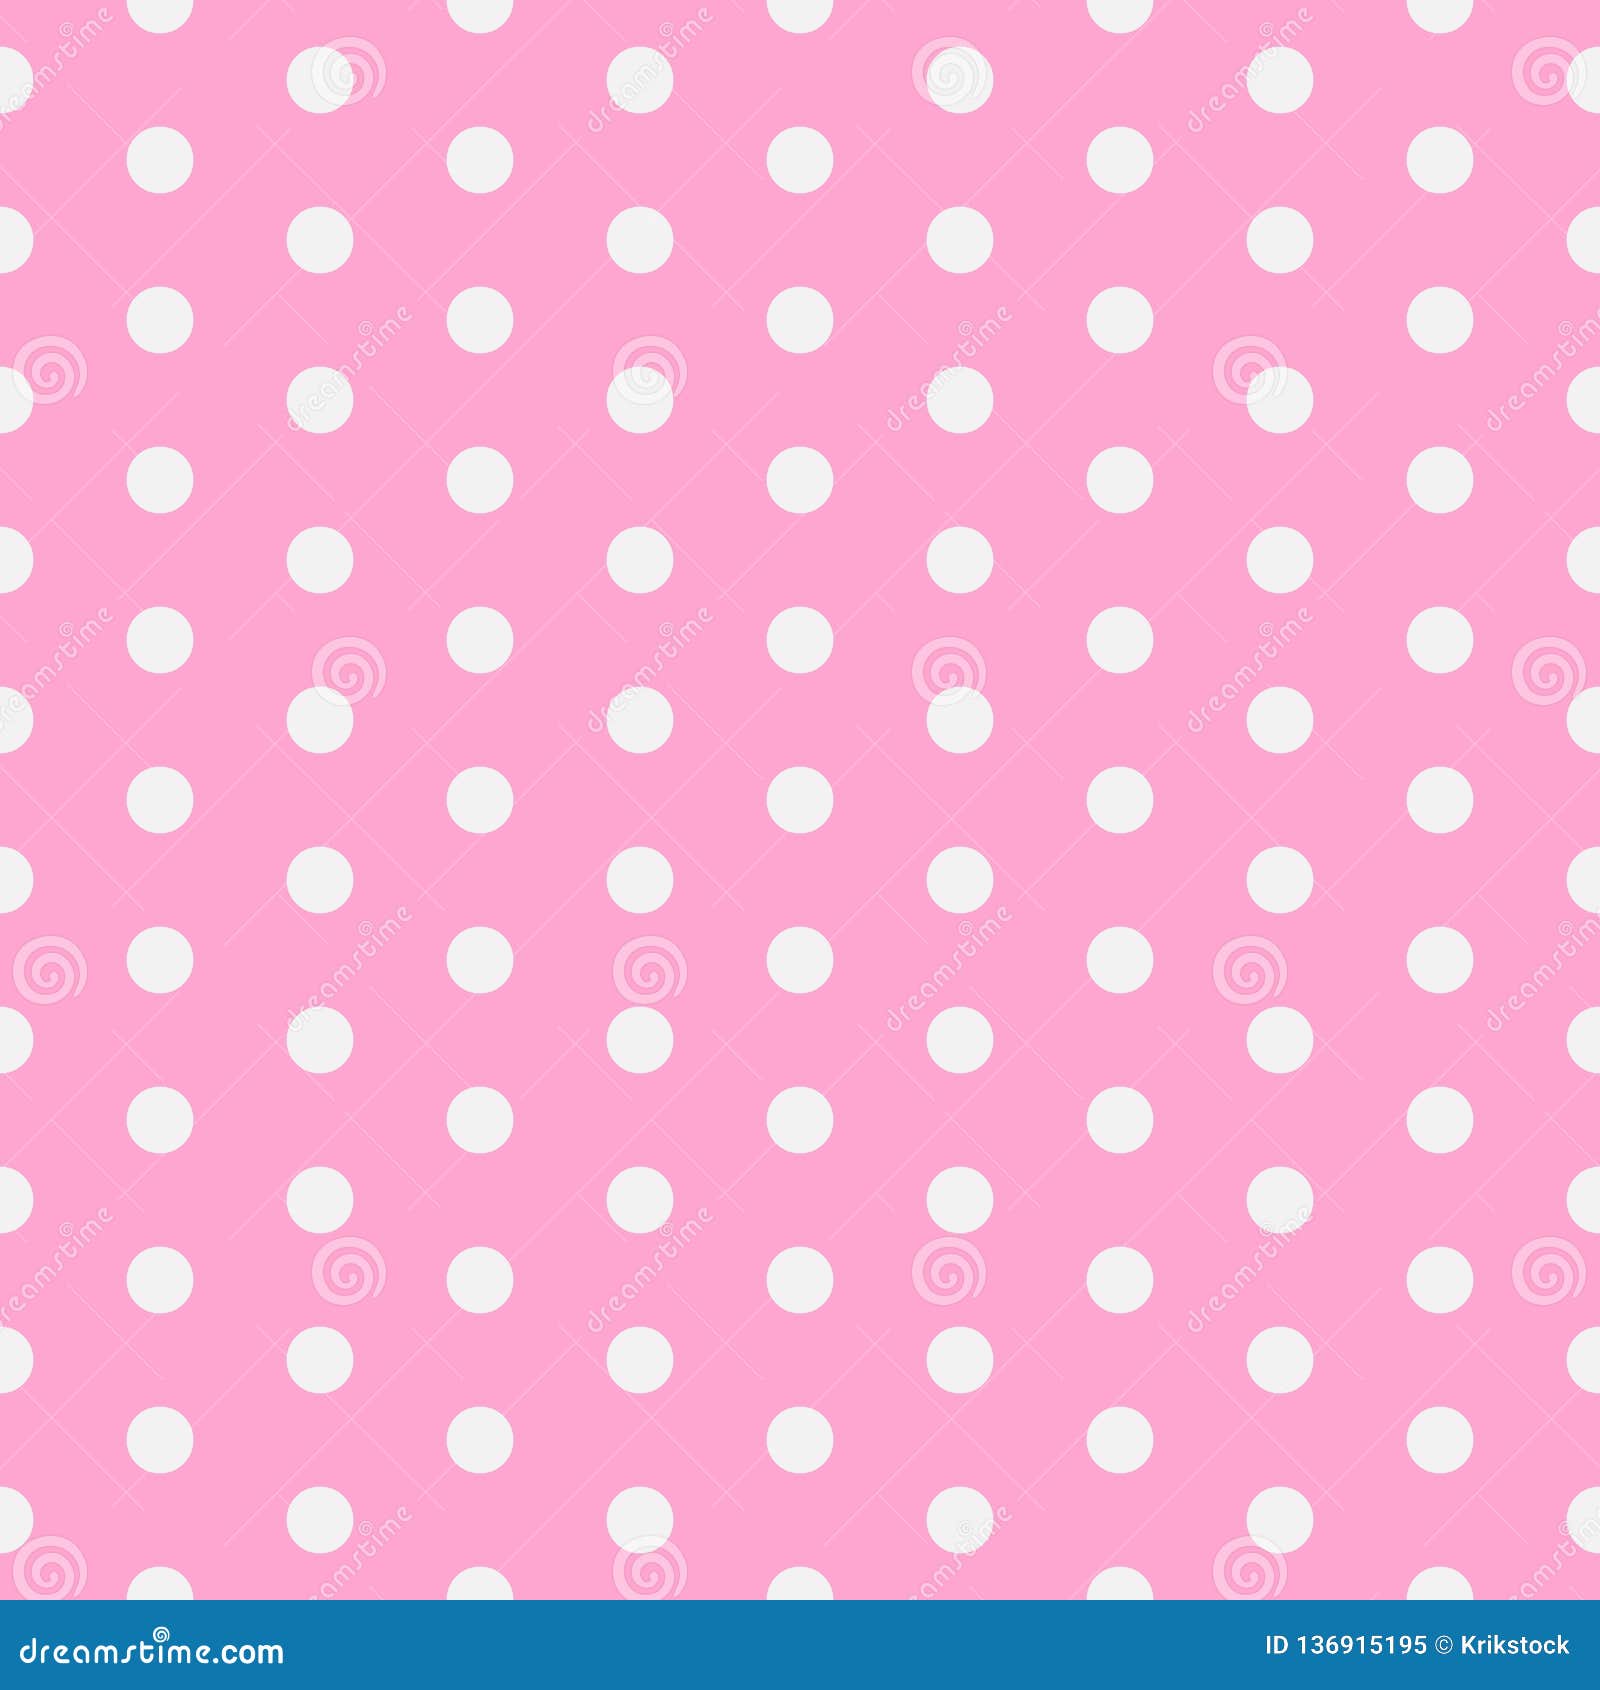 Baby Background. Polka Dot Pattern. Vector Illustration with Small ...